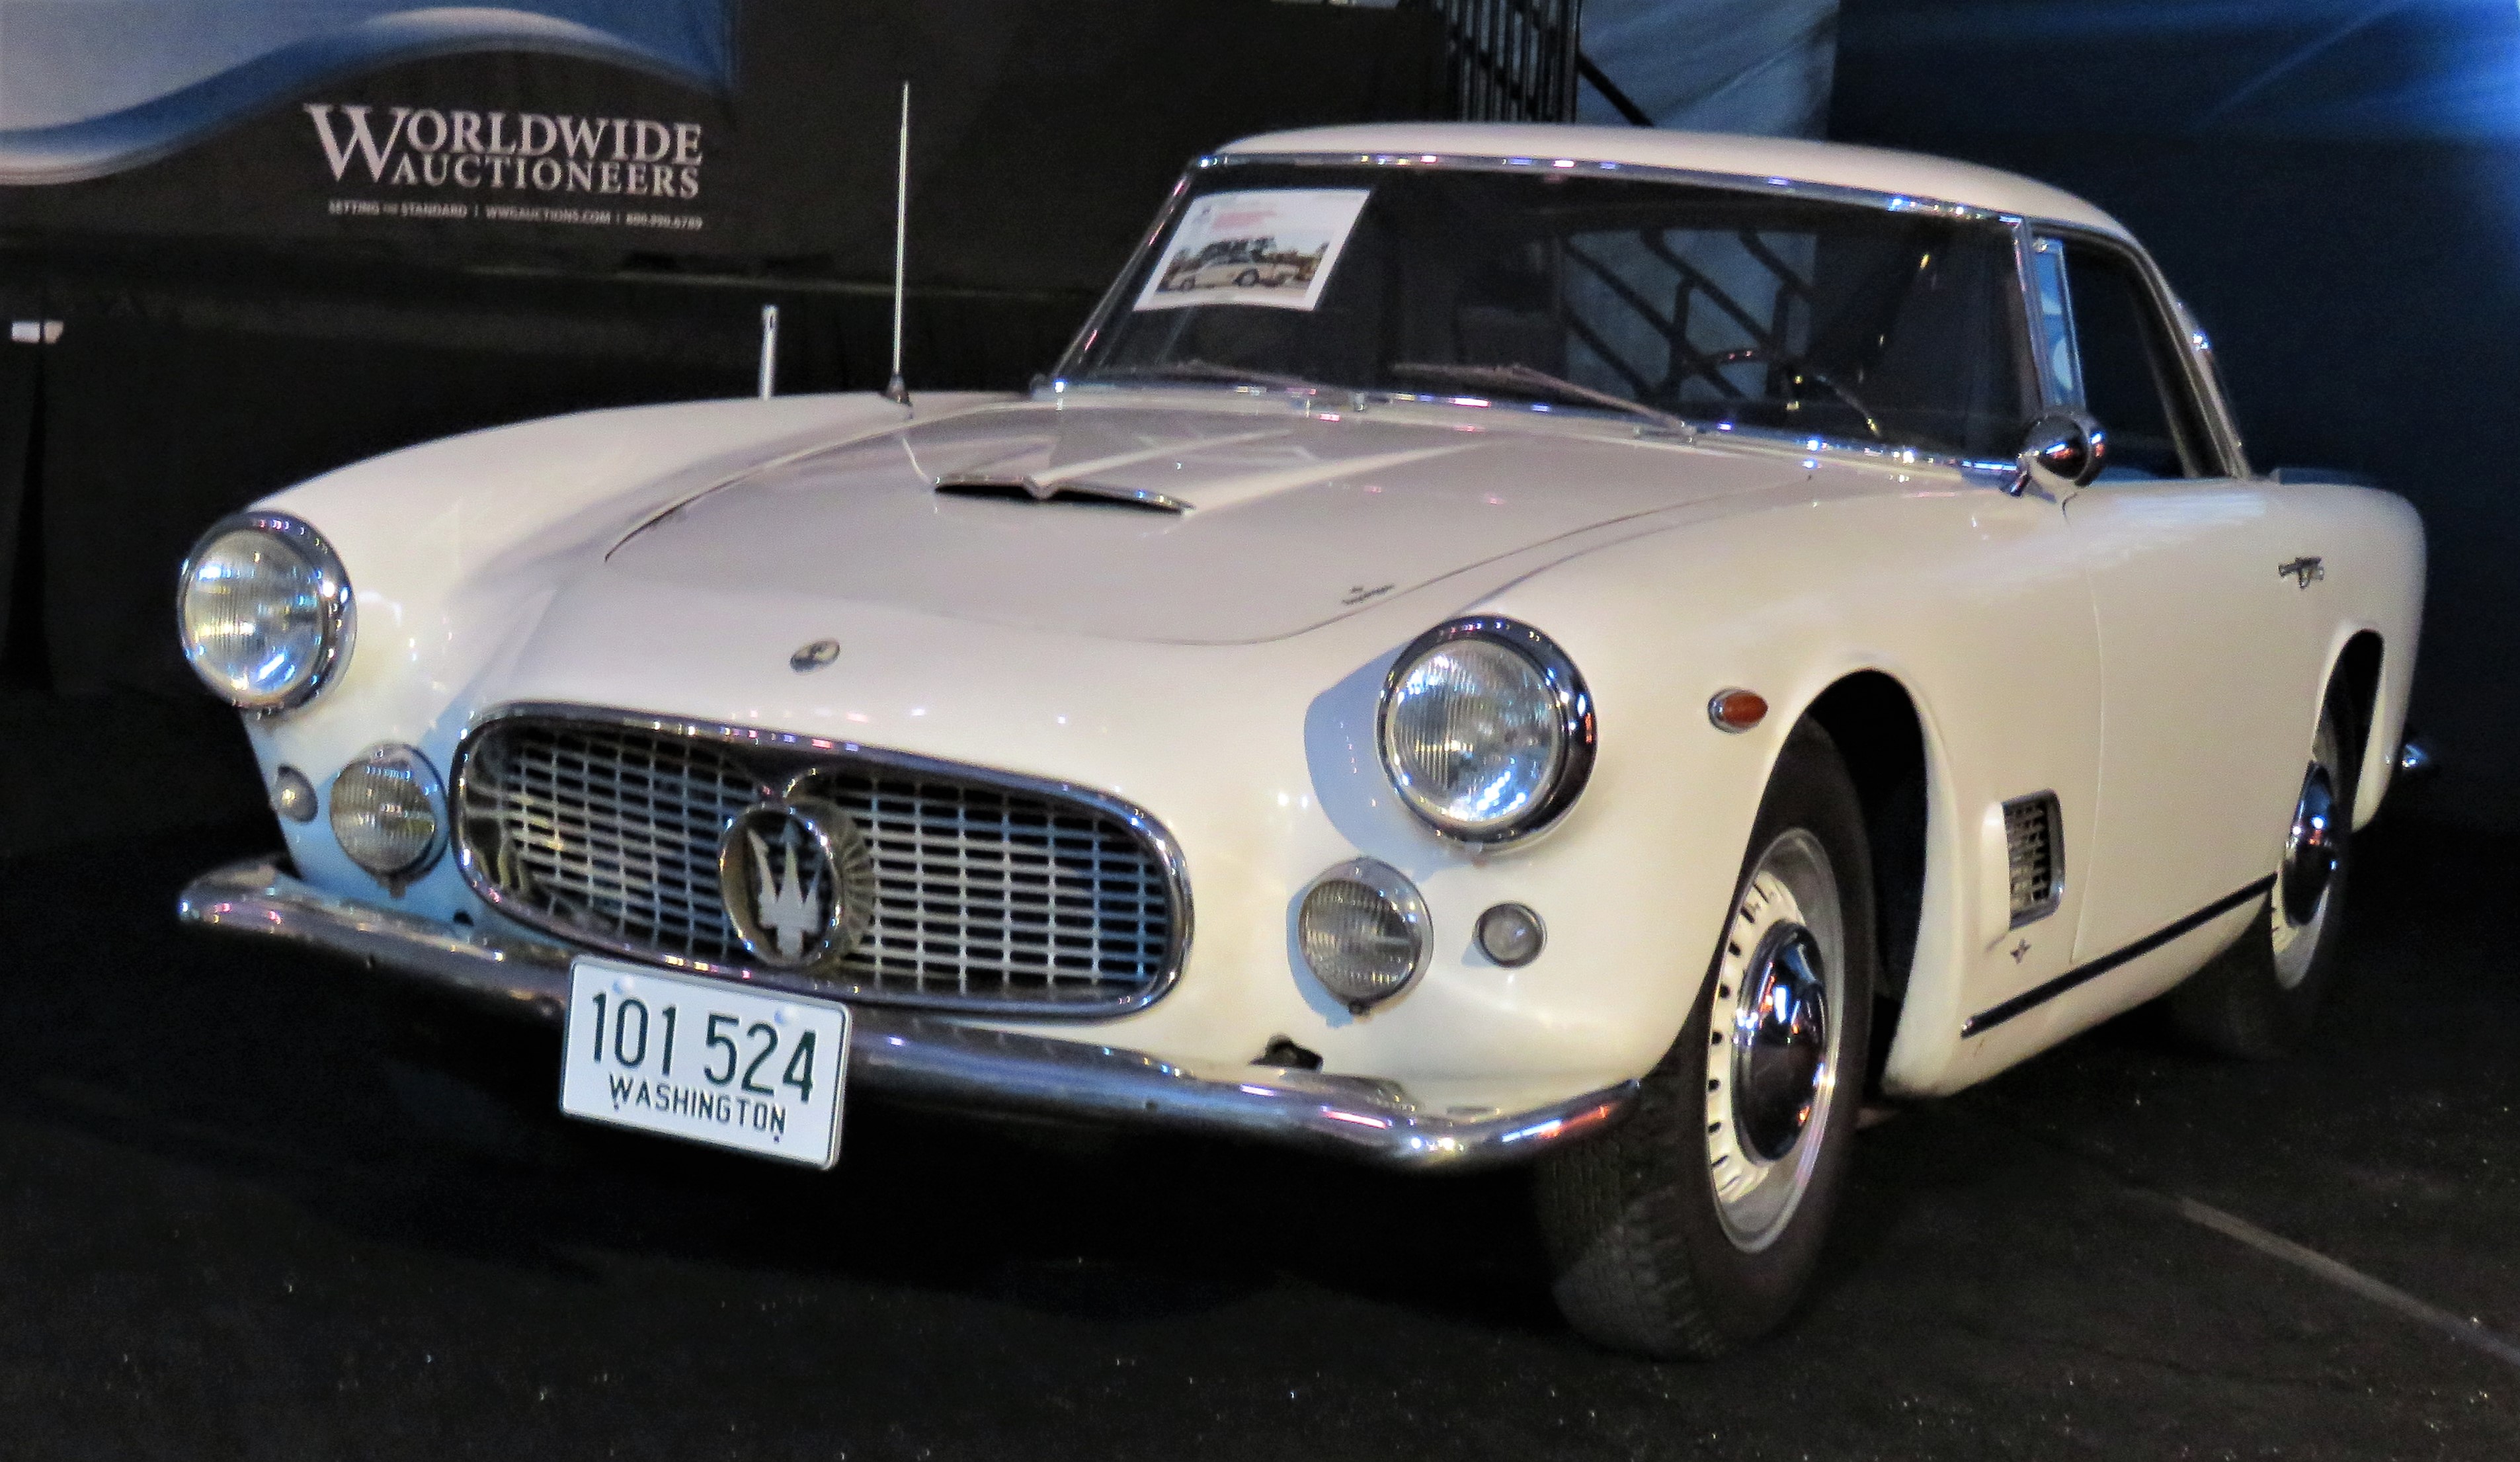 , Bob’s picks from Worldwide’s Scottsdale auction (controversial car not included), ClassicCars.com Journal